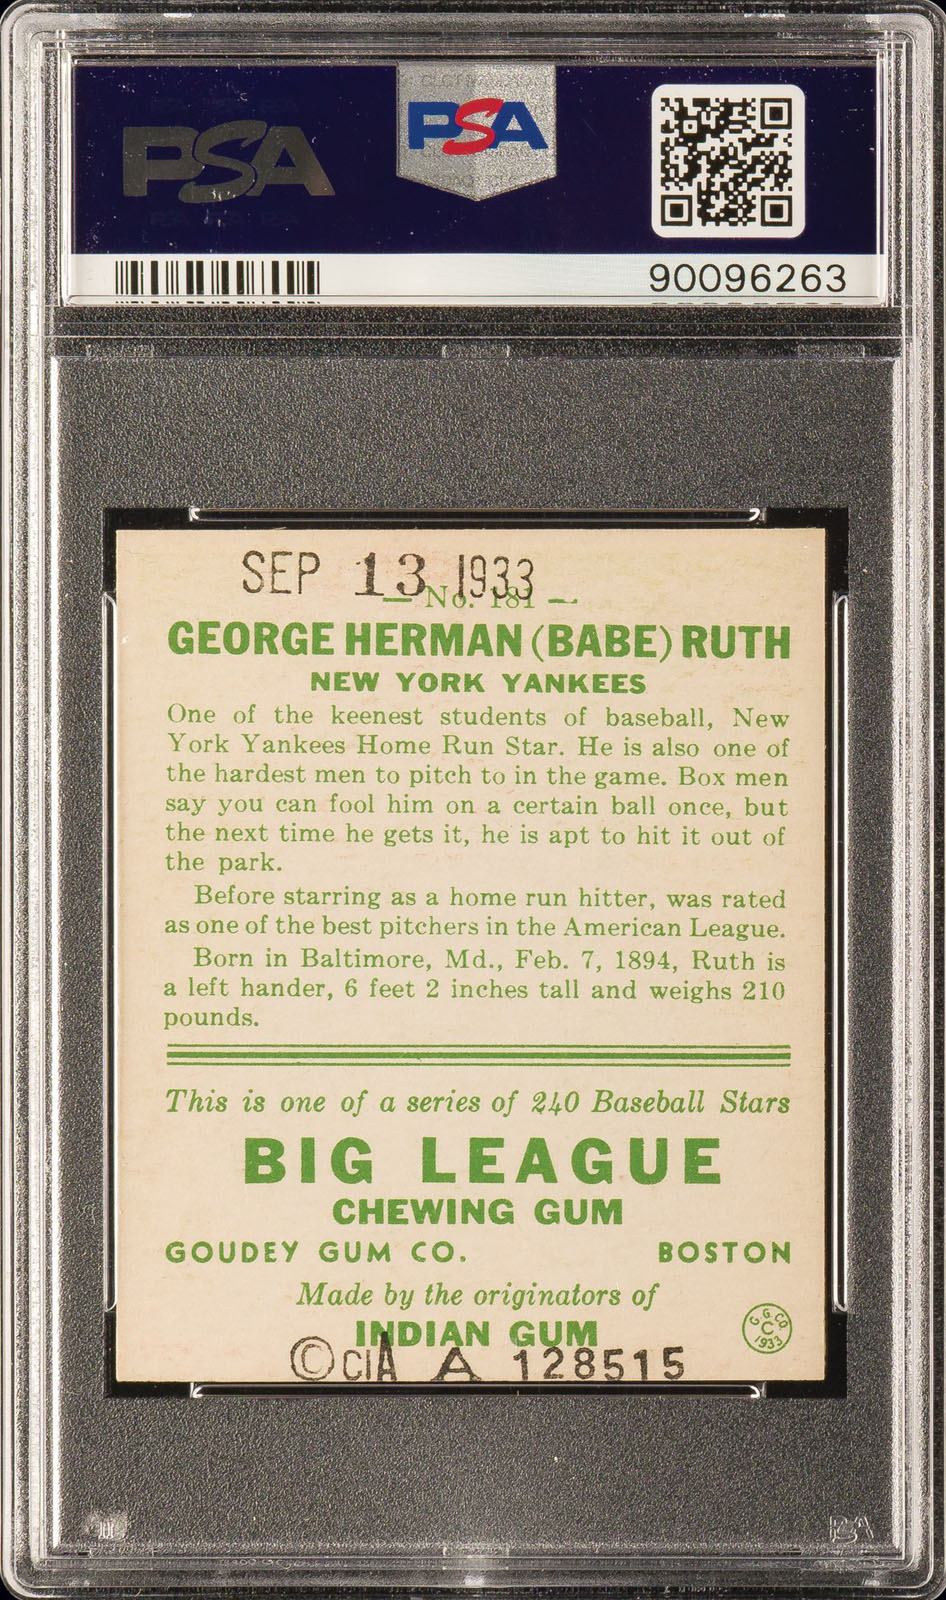 Lot Detail - 1933 Goudey #149 Babe Ruth Signed Card – PSA/DNA 8